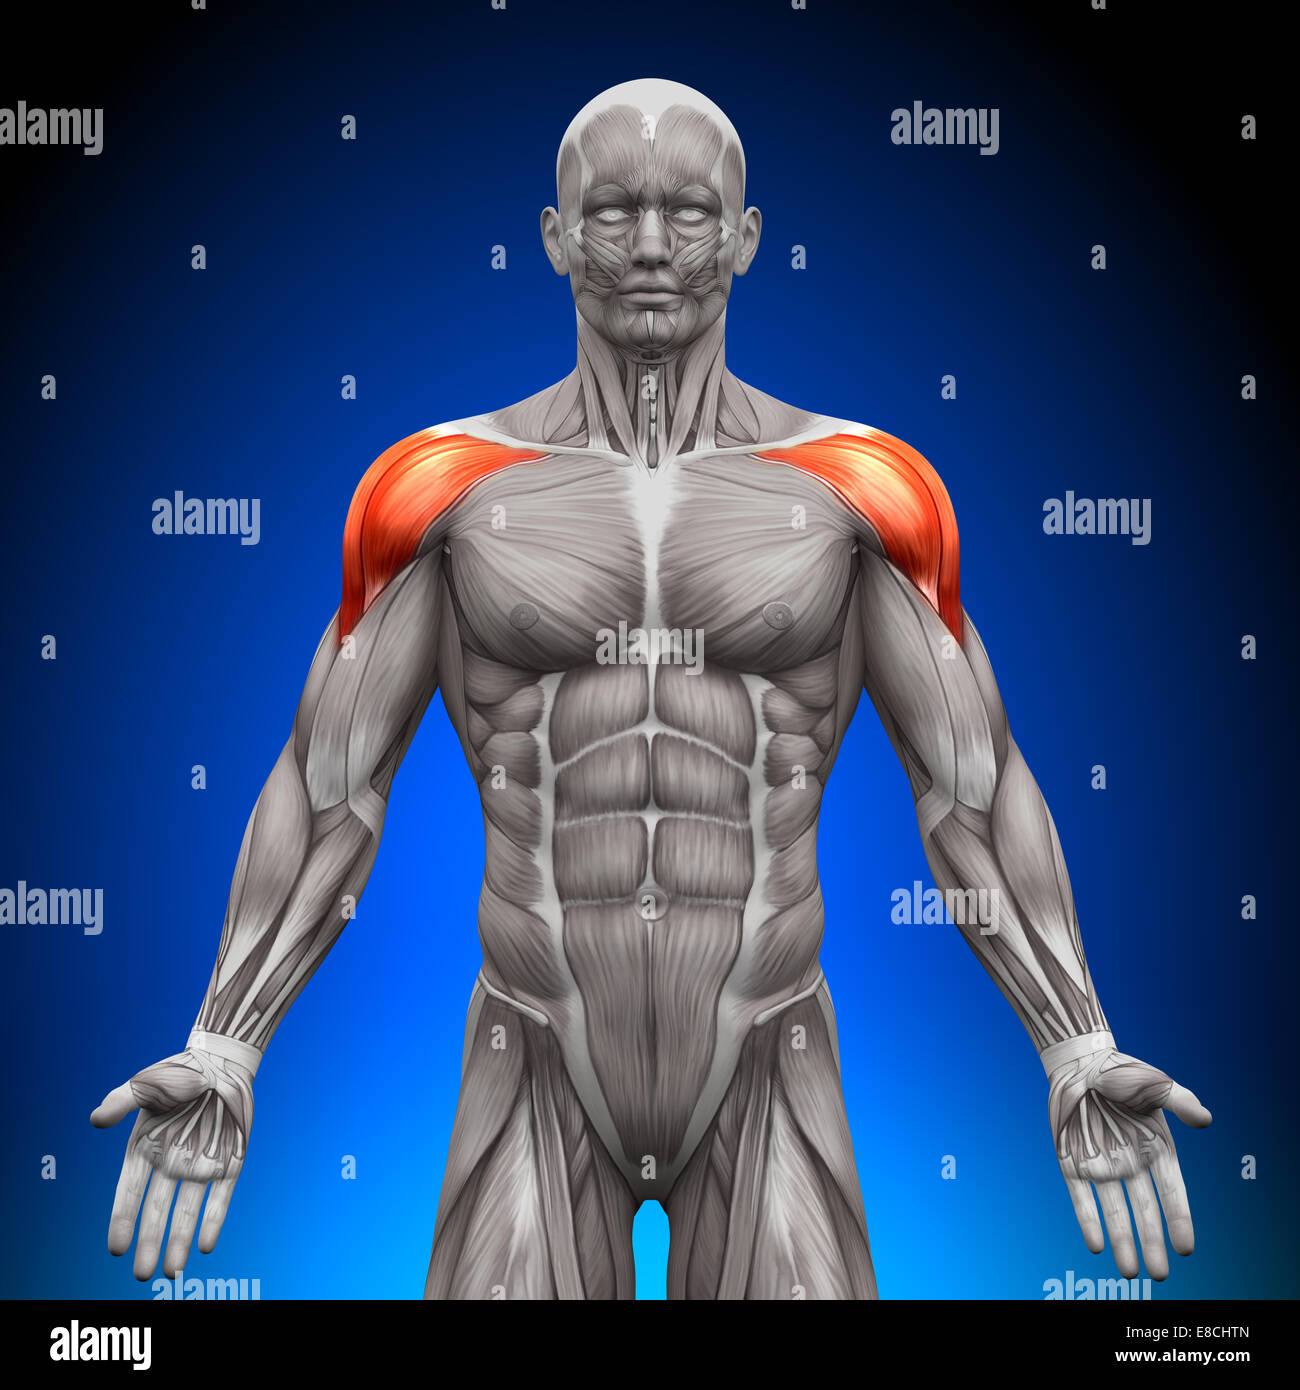 Biceps and triceps muscles, illustration - Stock Image - F036/4655